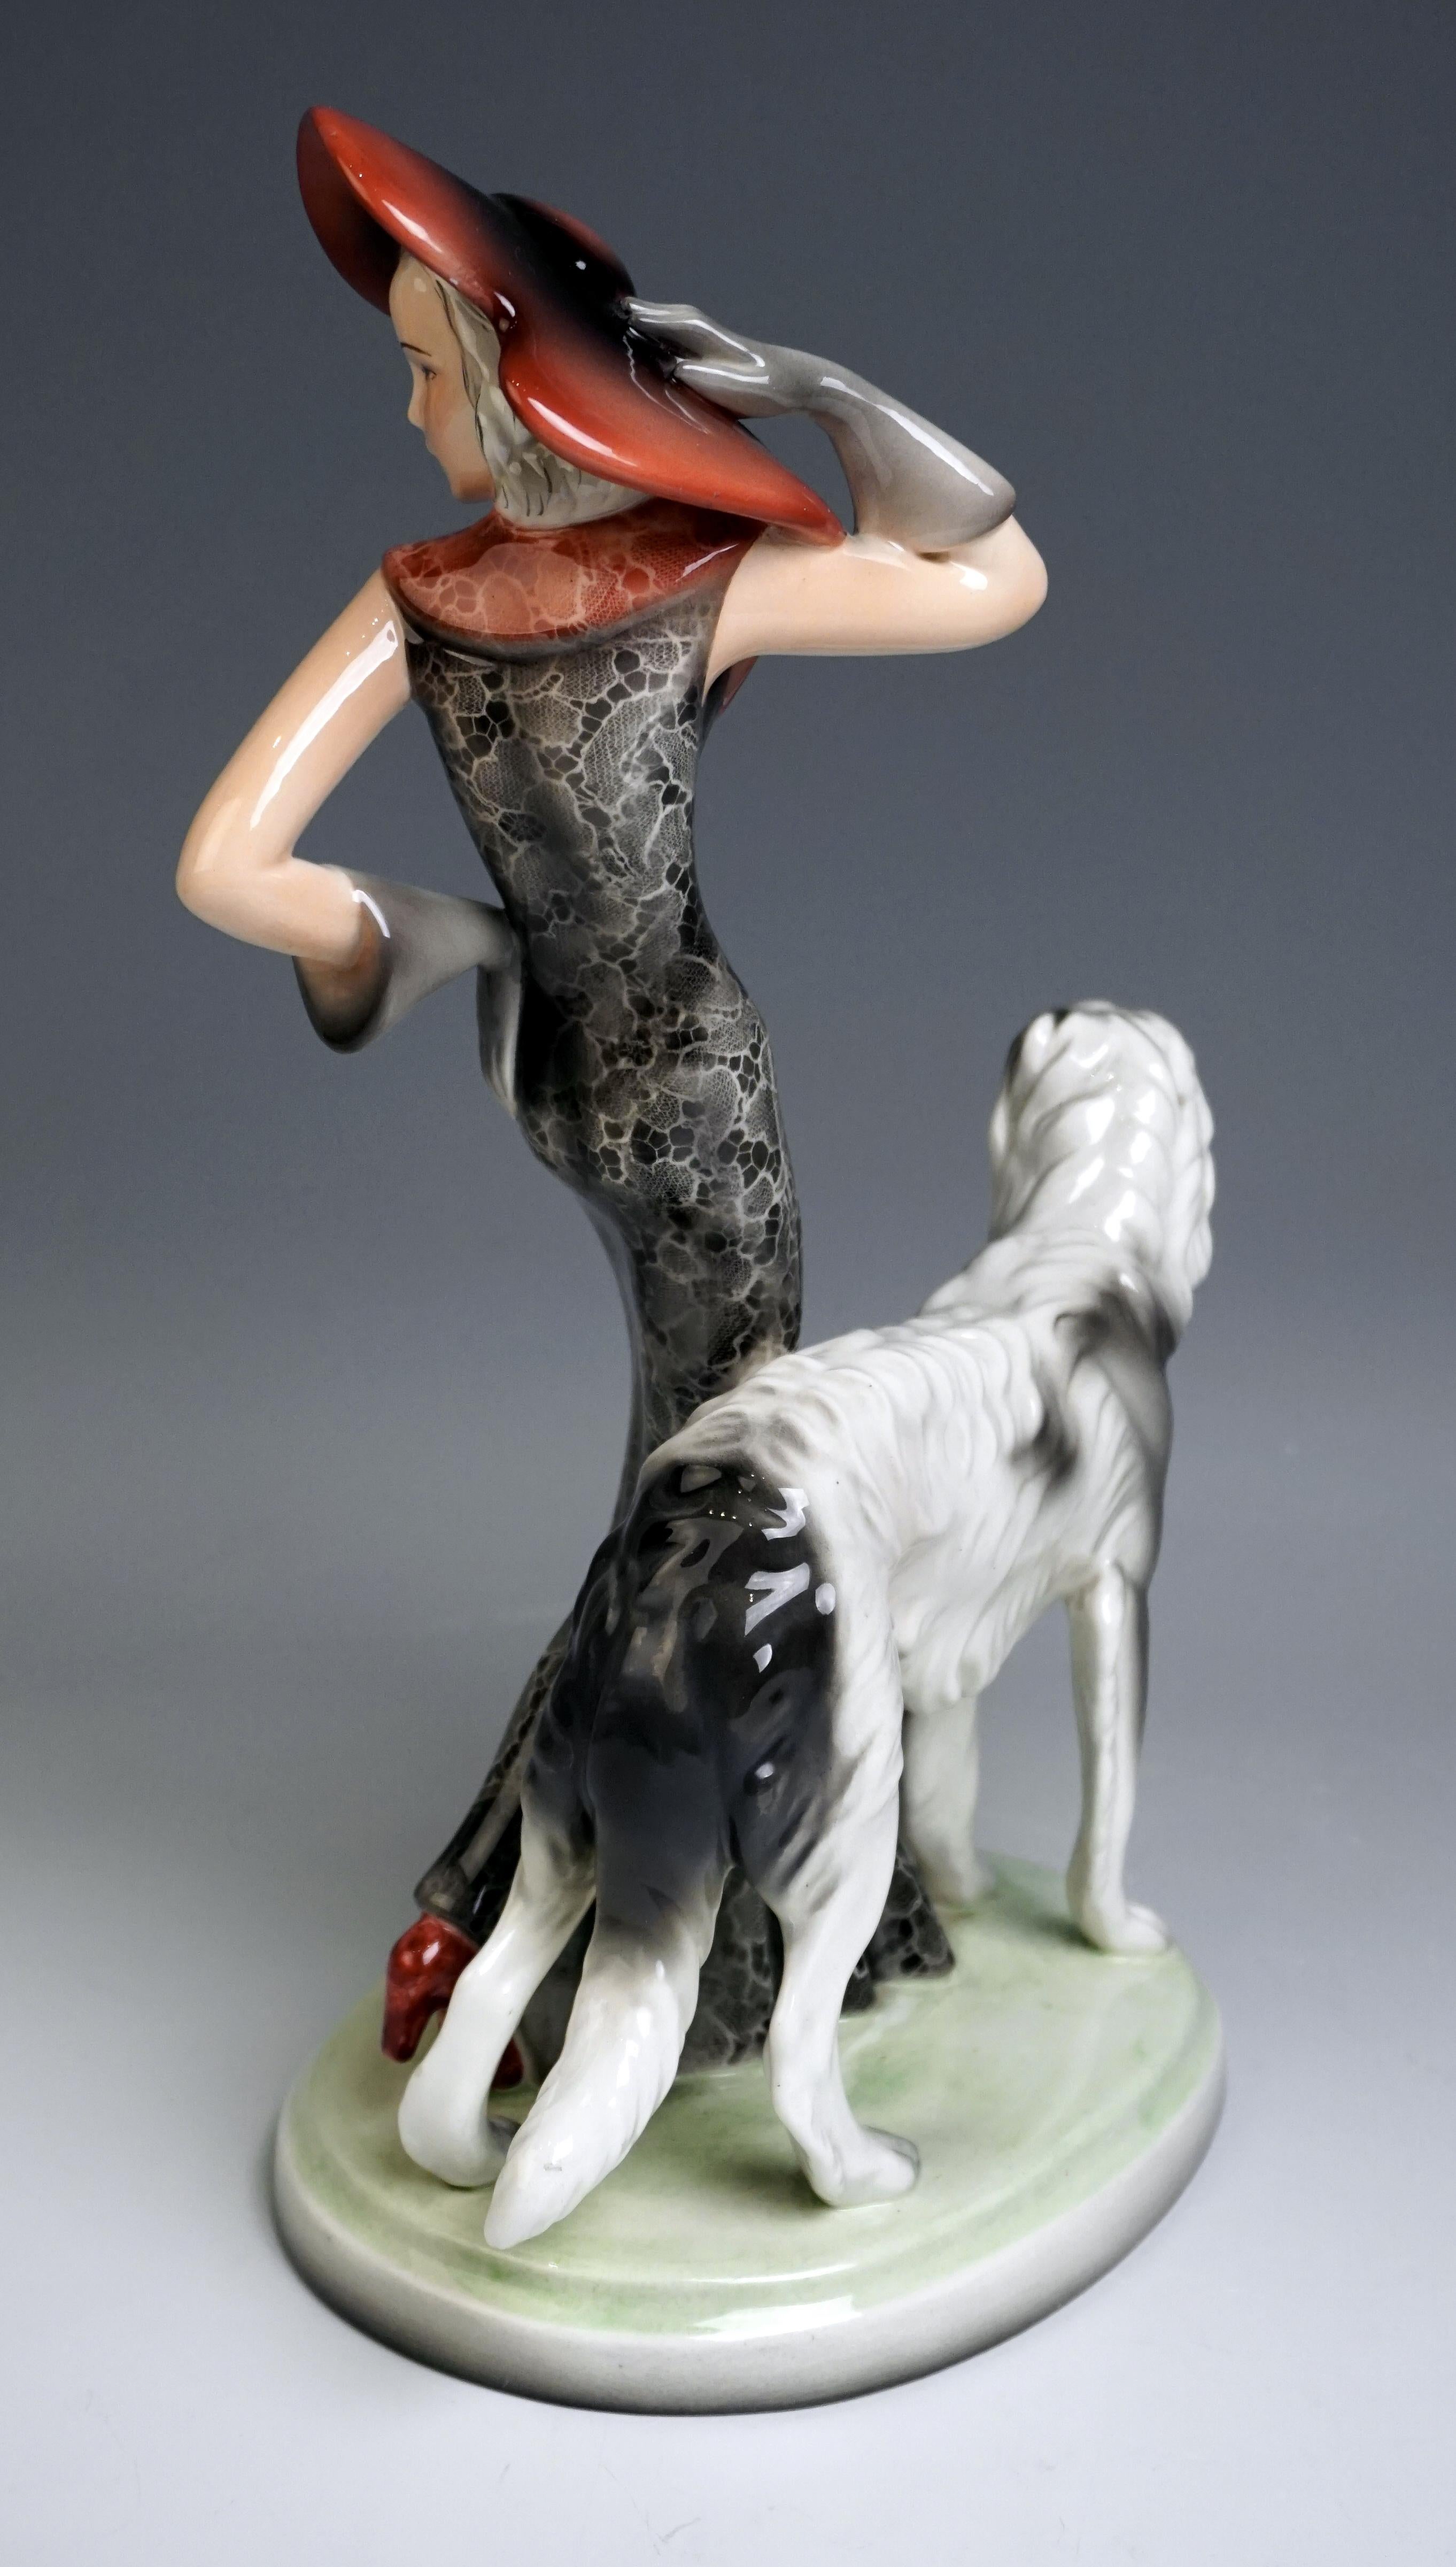 Hand-Crafted Goldscheider Figurine 'Masquerade' Lady with Barsoi by Claire Weiss, circa 1939